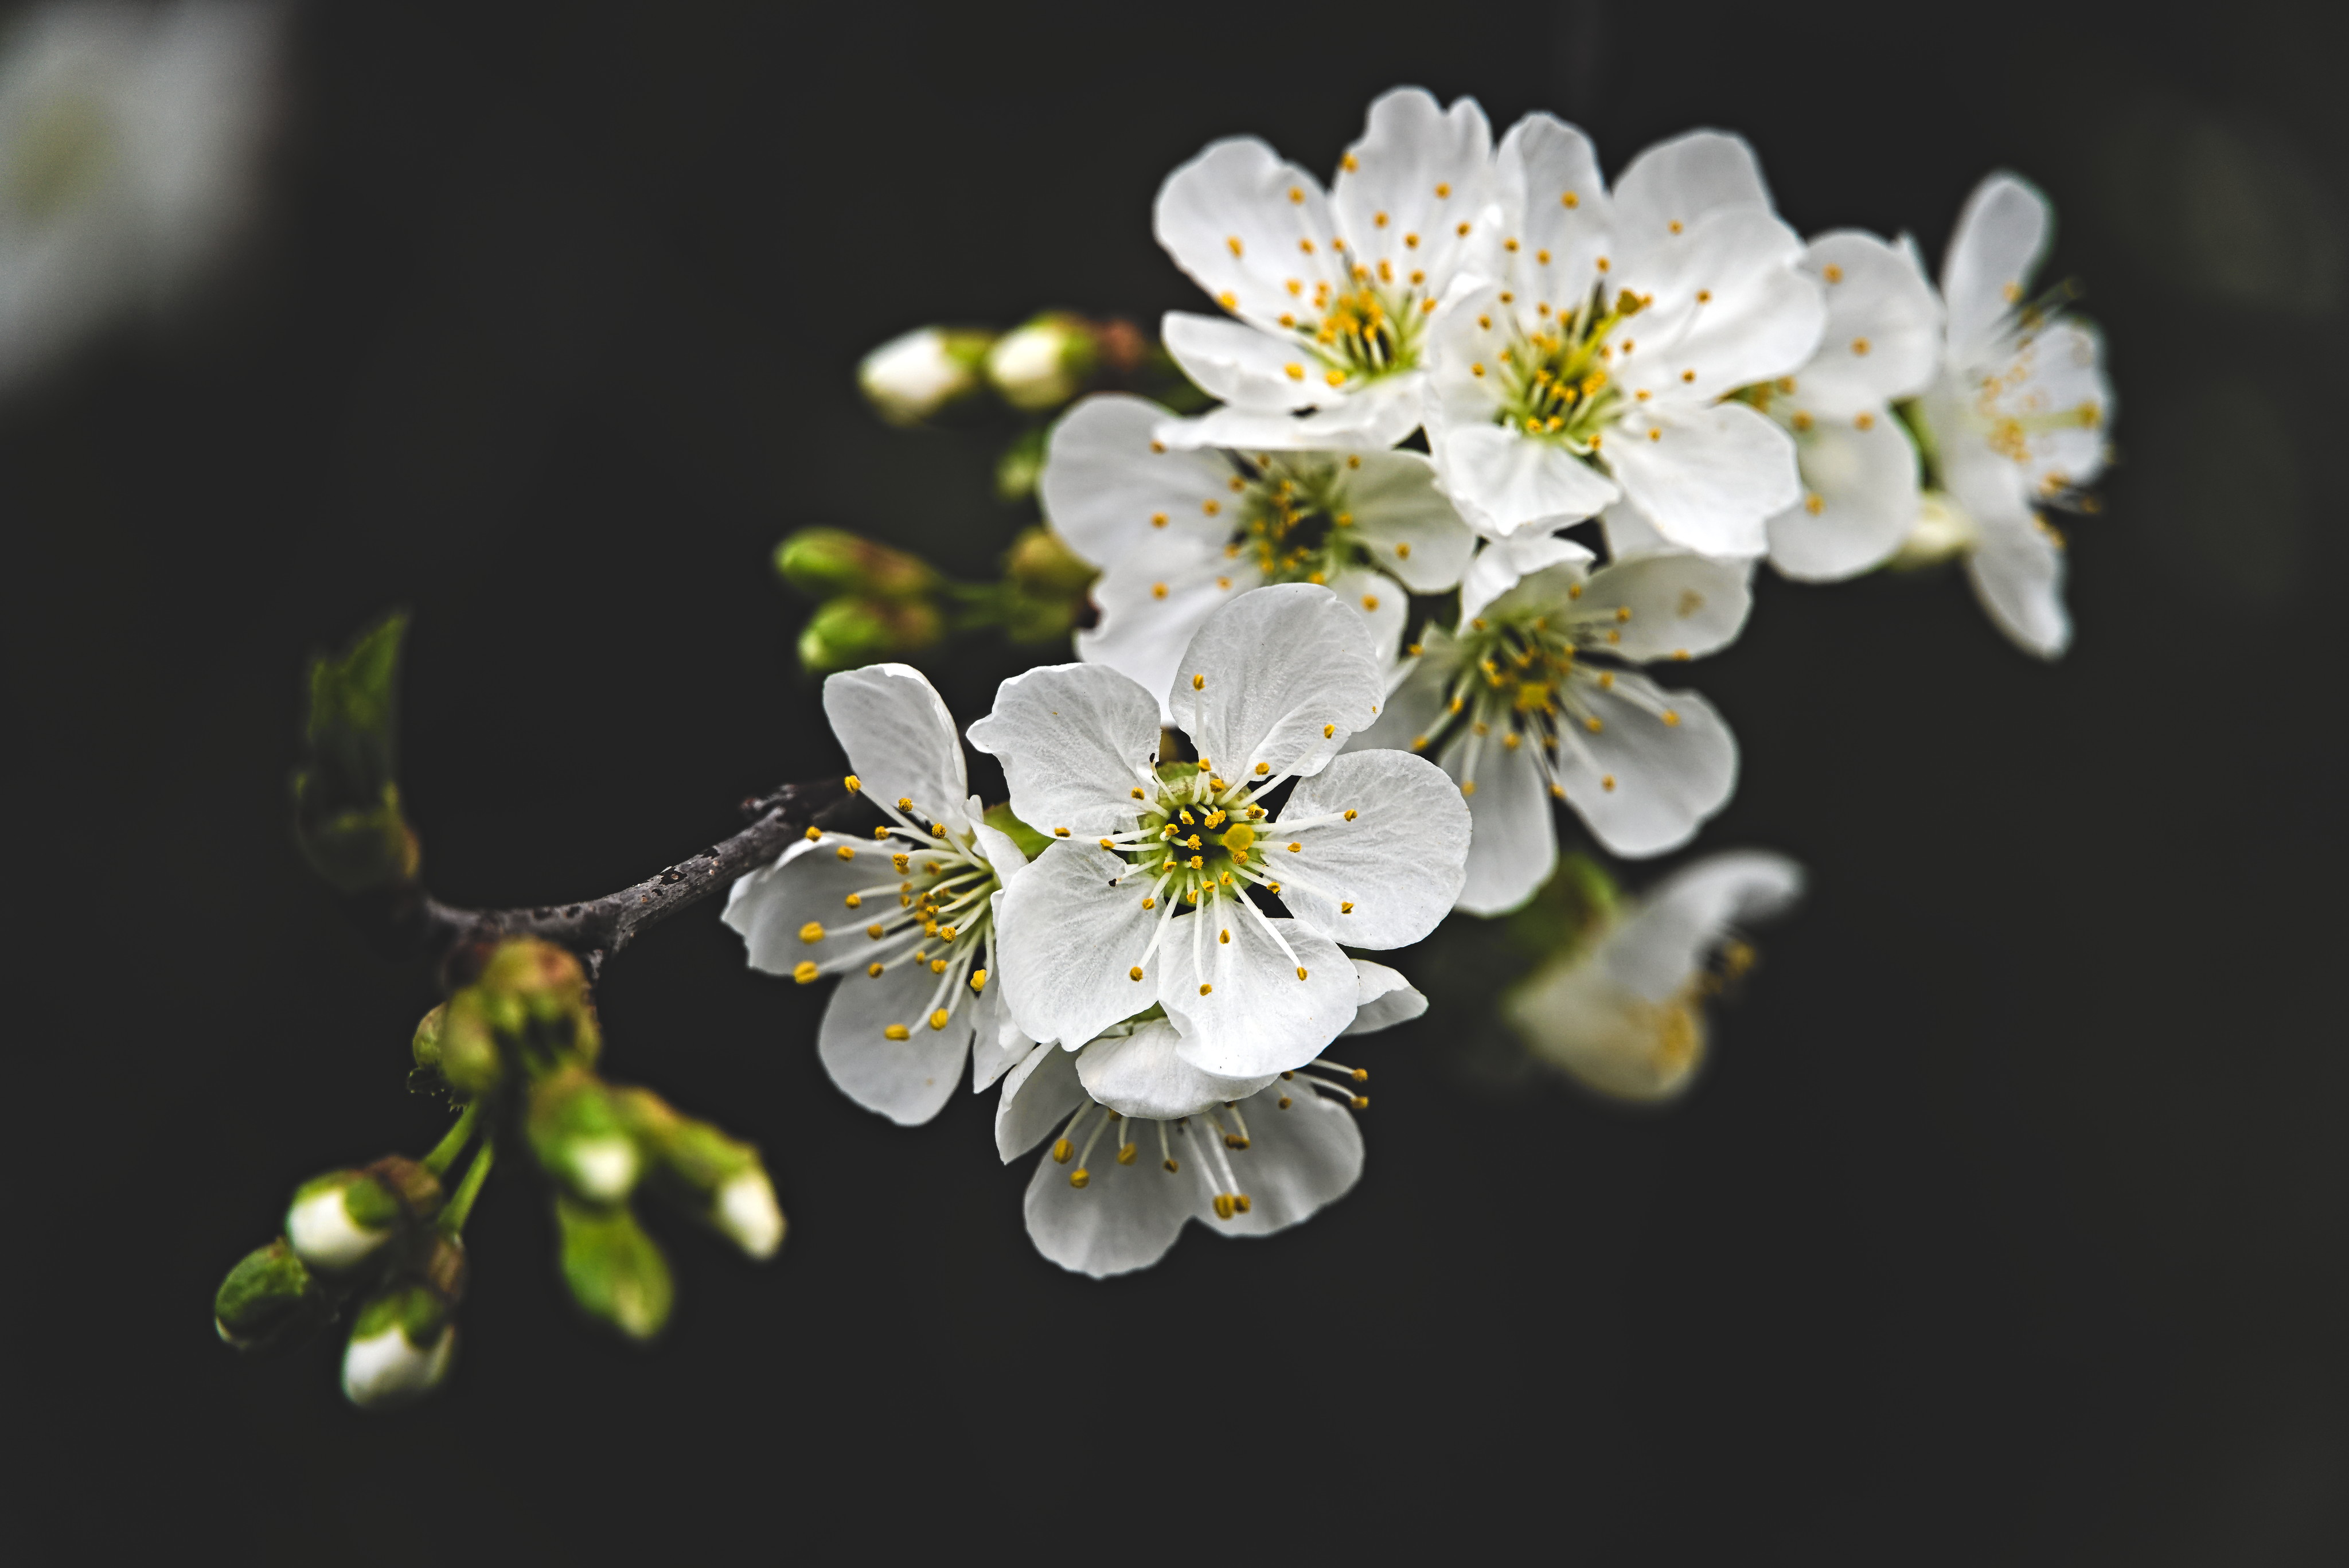 General 4096x2734 flowers Plum blossom nature photography depth of field